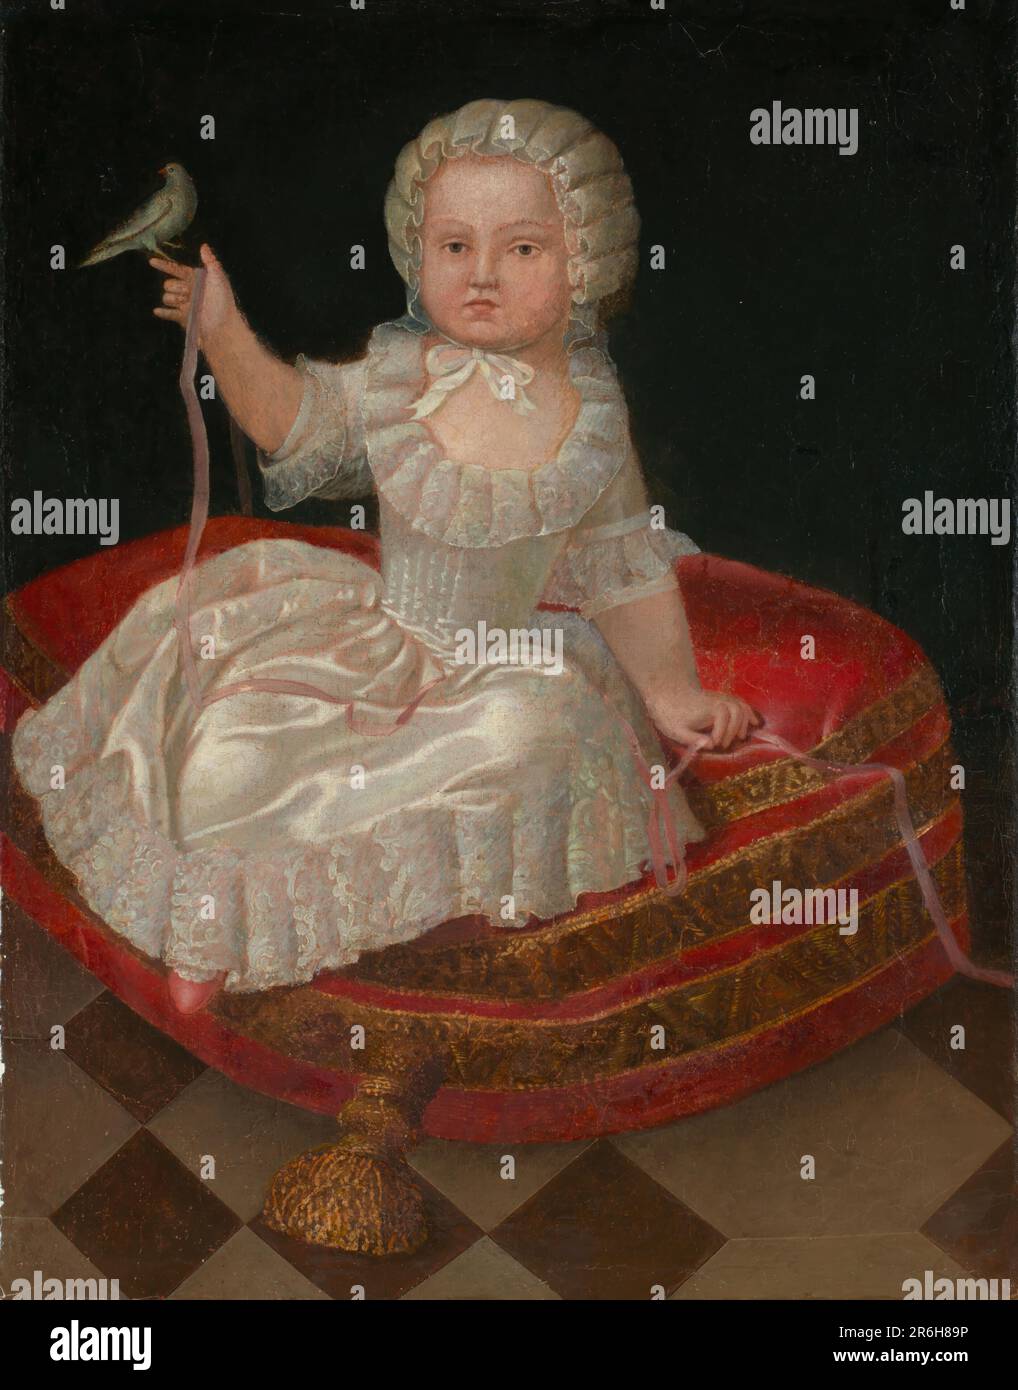 Girl on a Hassock. oil on canvas. Date: 18th century. Museum: Smithsonian American Art Museum. Stock Photo